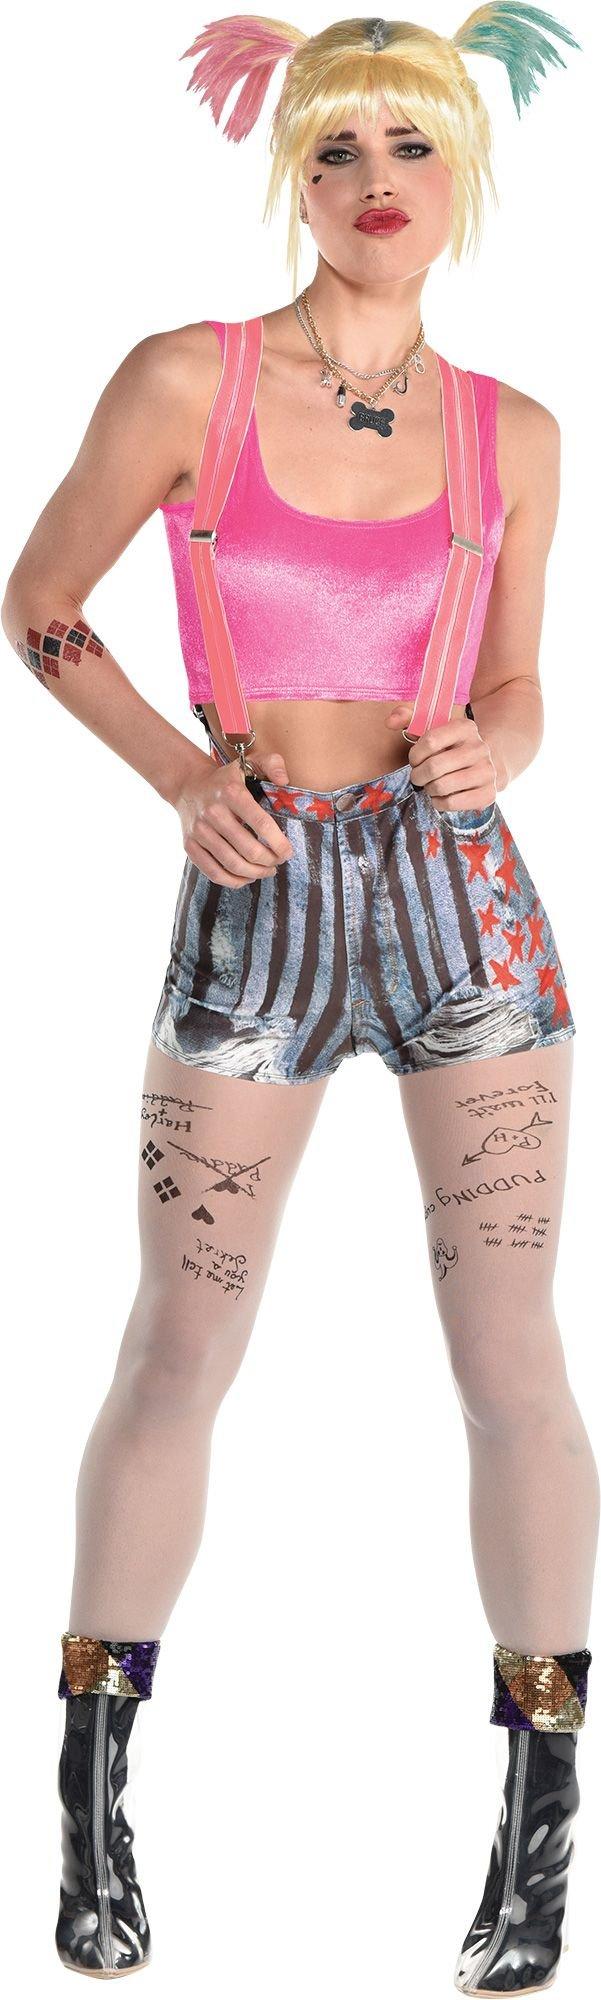 Harley Quinn Costume for Adults - Birds of Prey | Party City